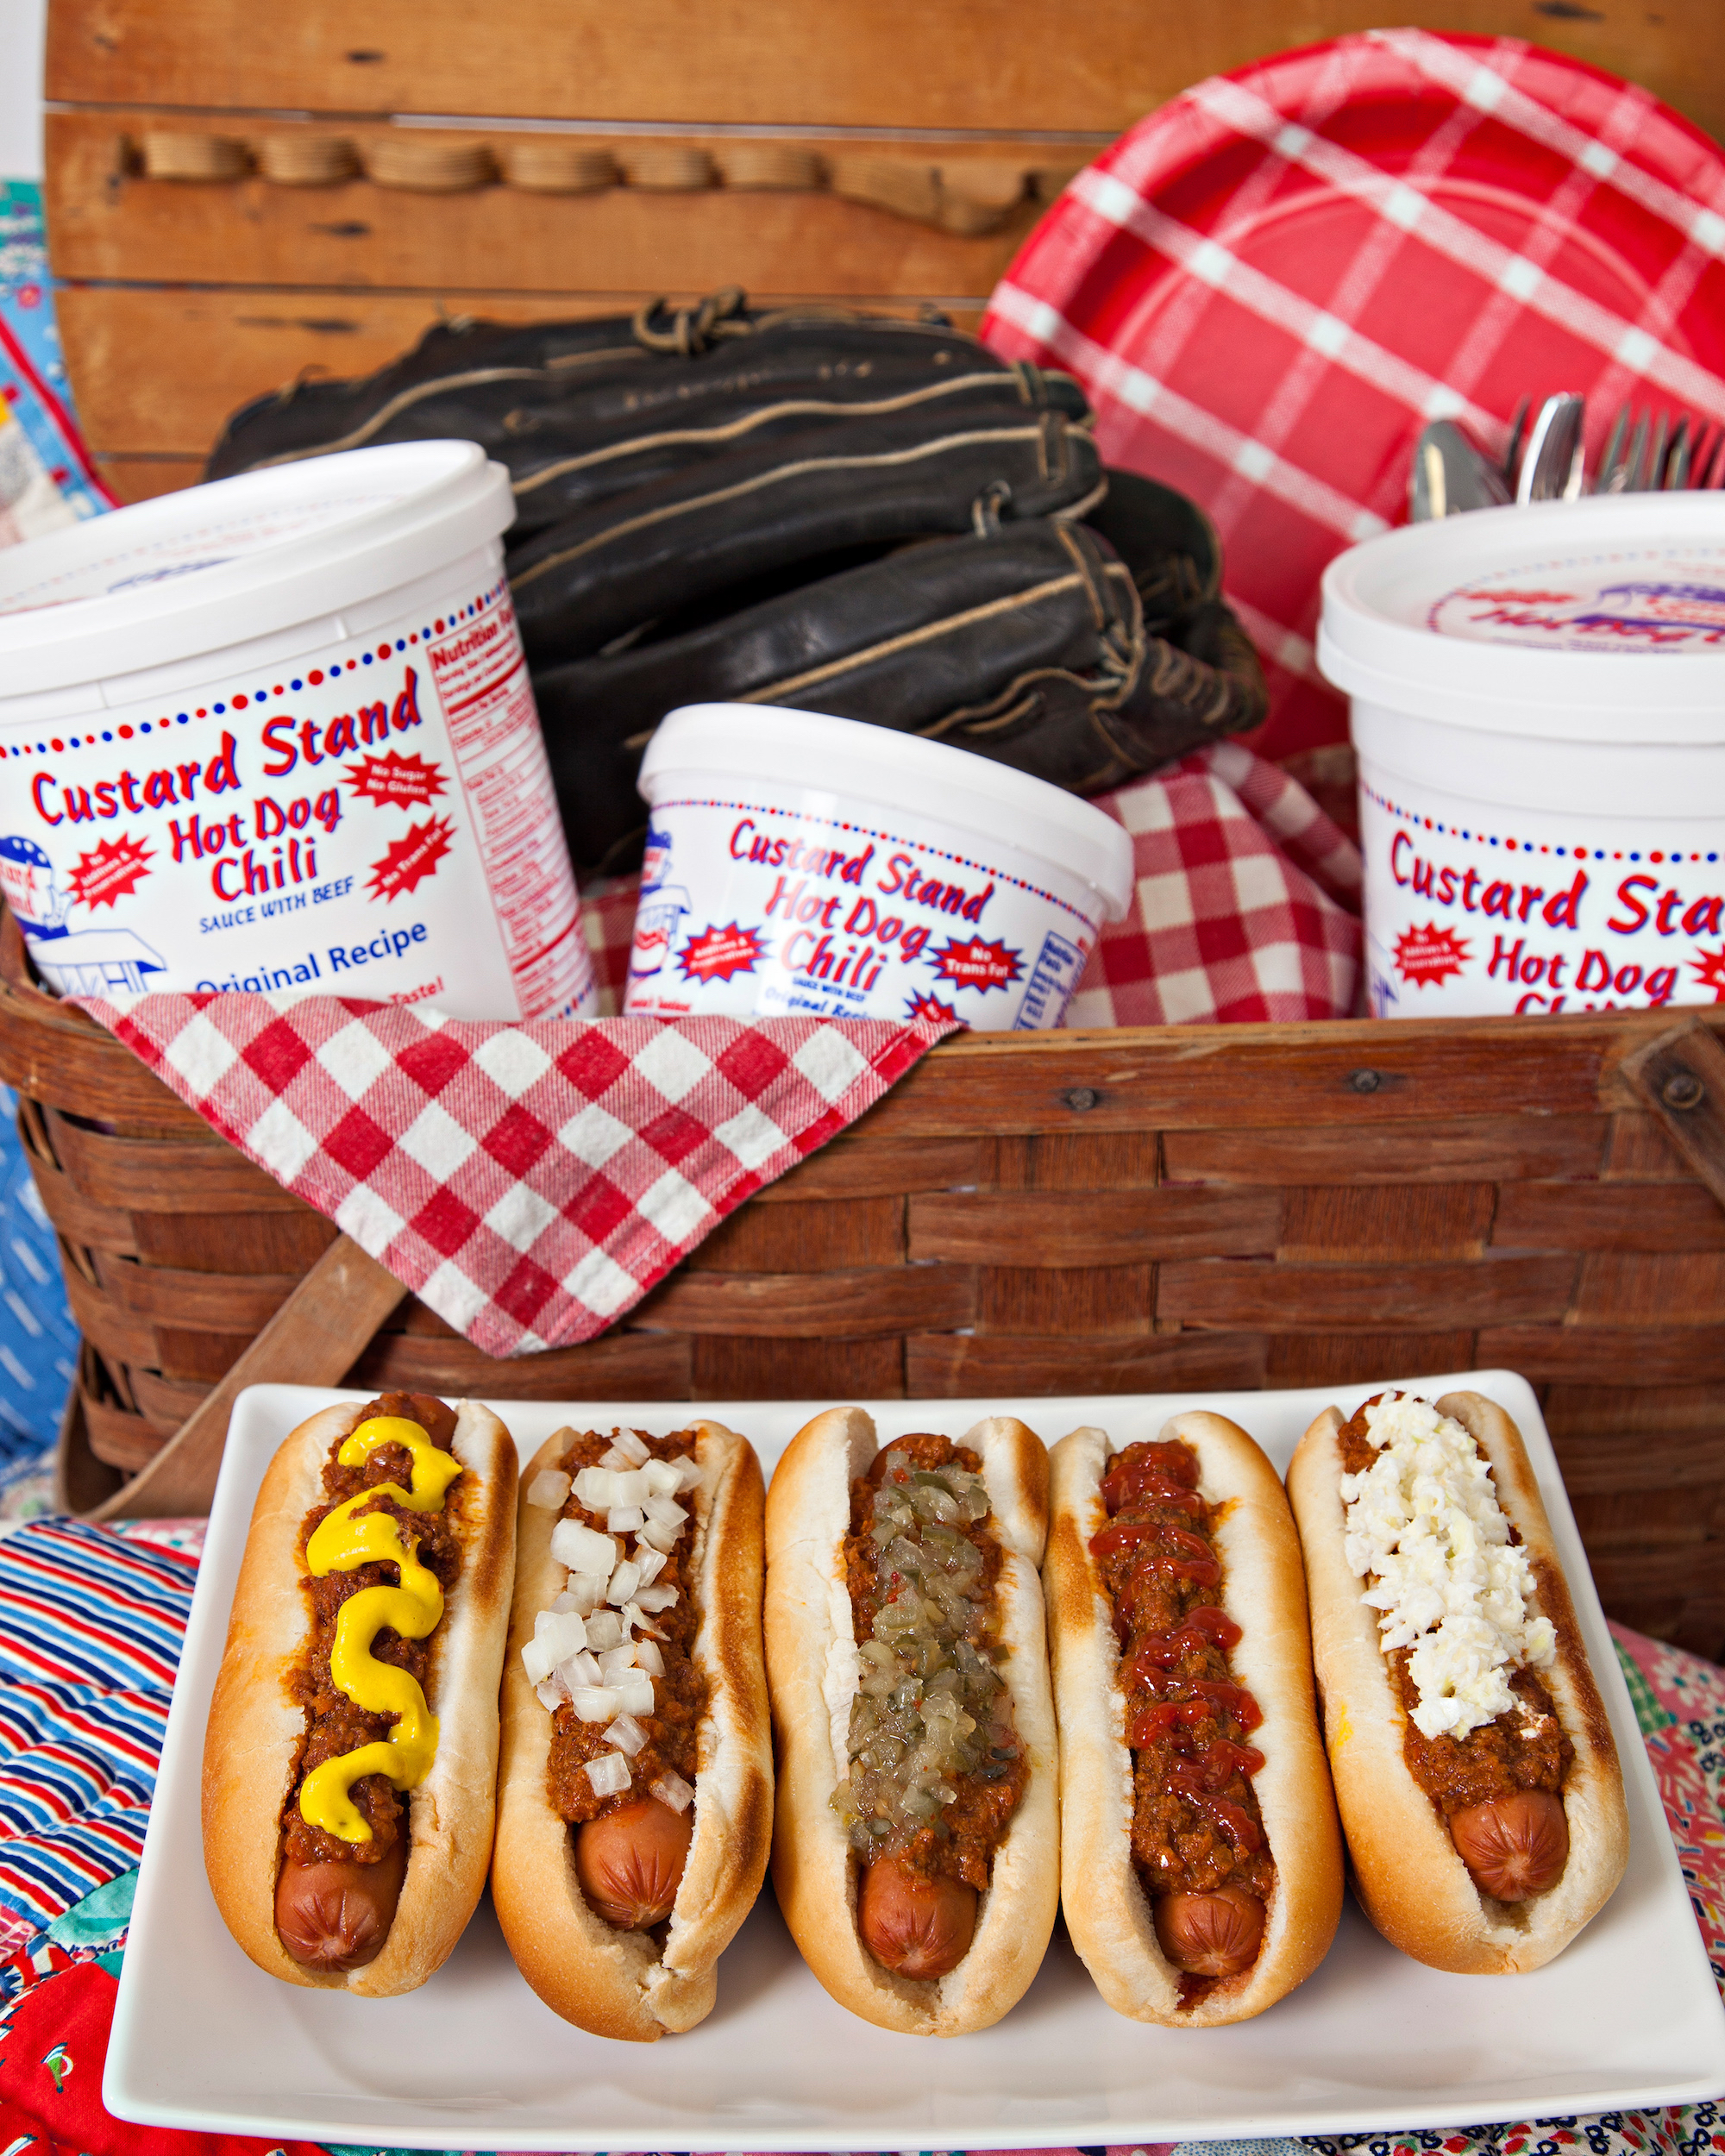 Custard Stand Chili West Virginia - marketing campaigns for restaurants